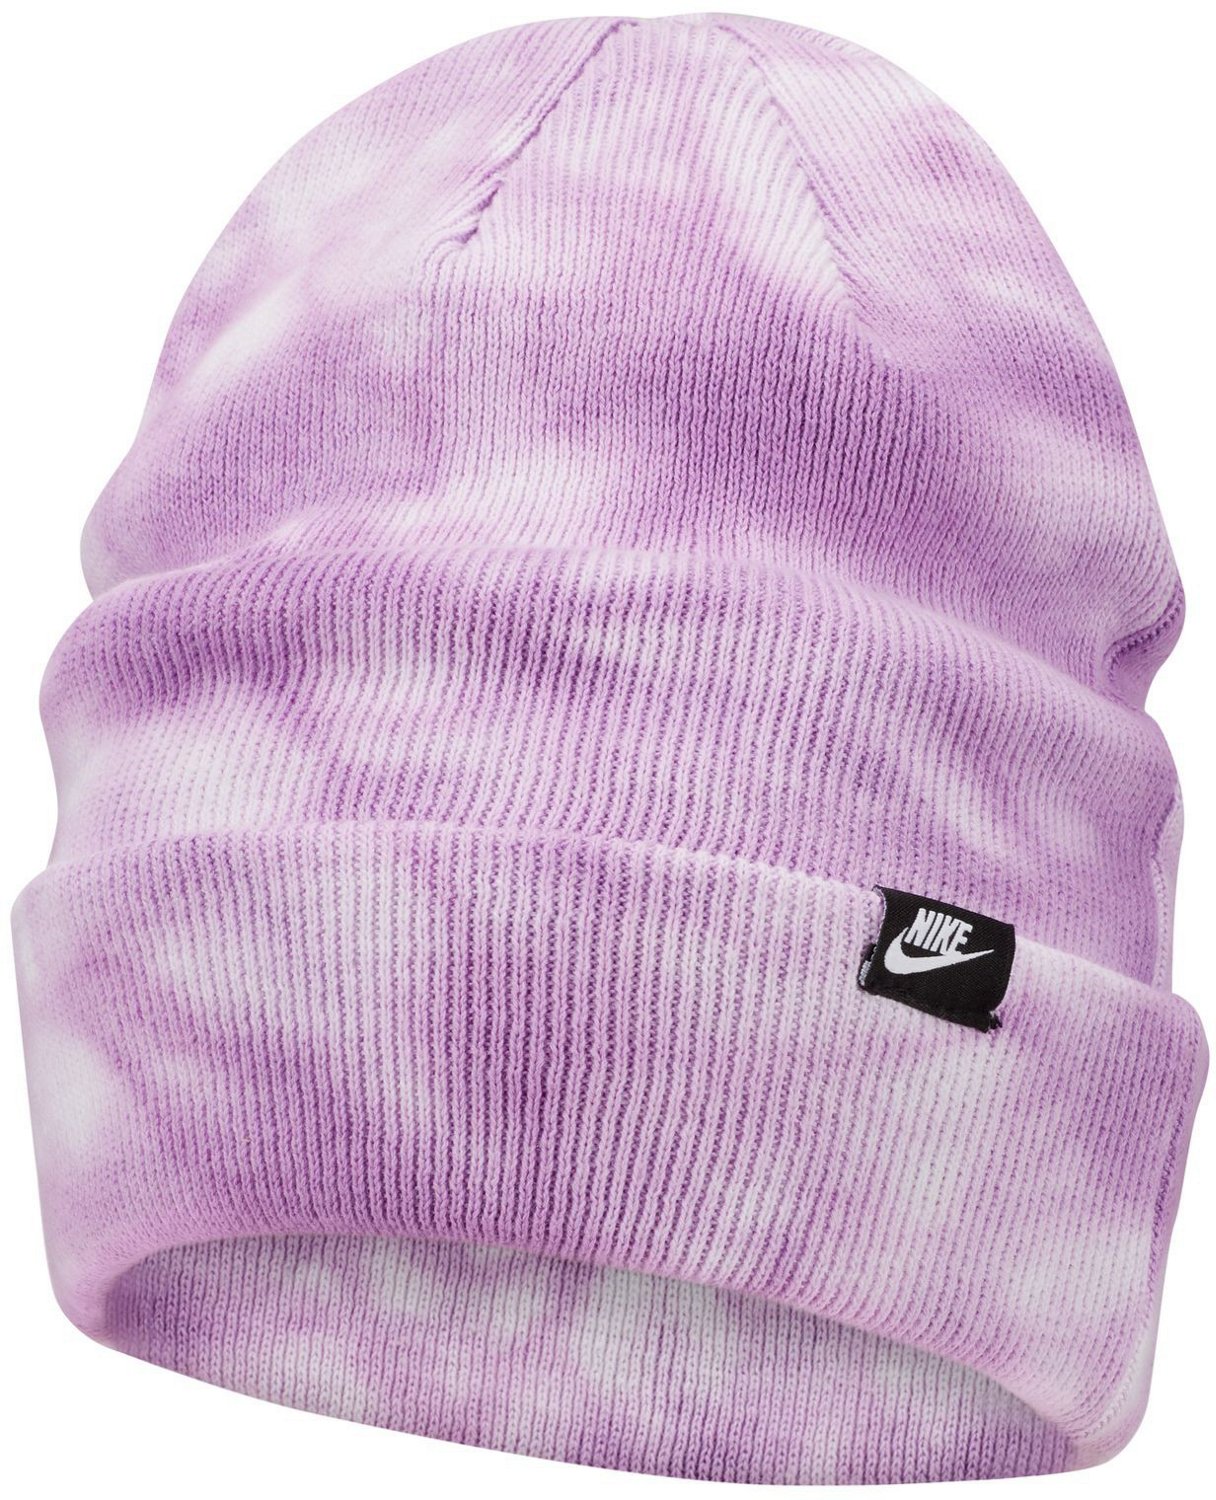 Nike Adults\' Terra Tie-Dye Beanie | Free Shipping at Academy